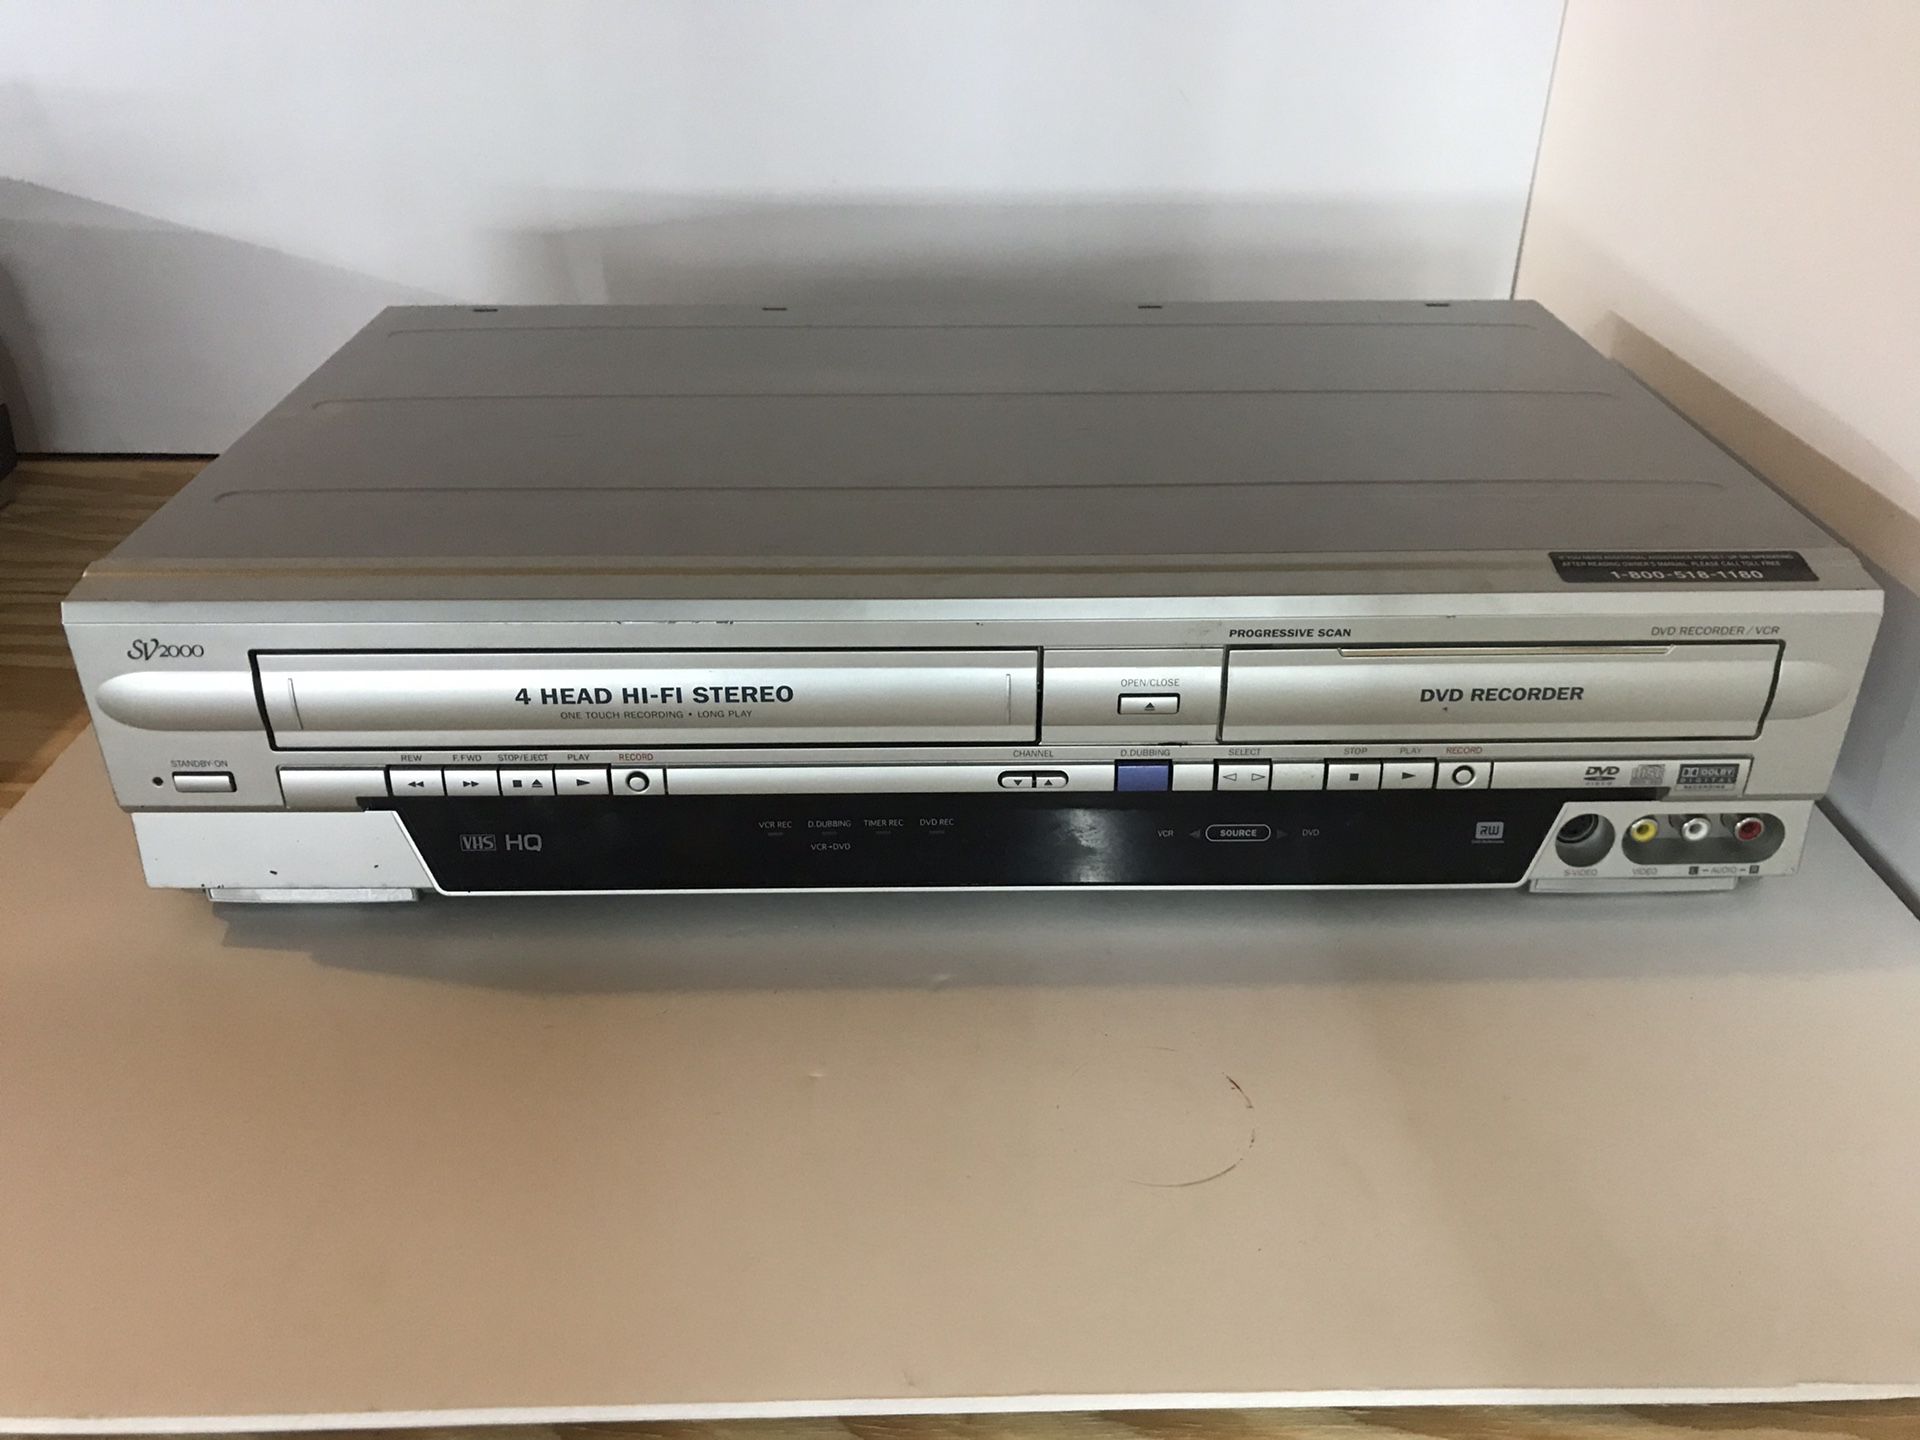 Sv2000 vcr And dvd combo